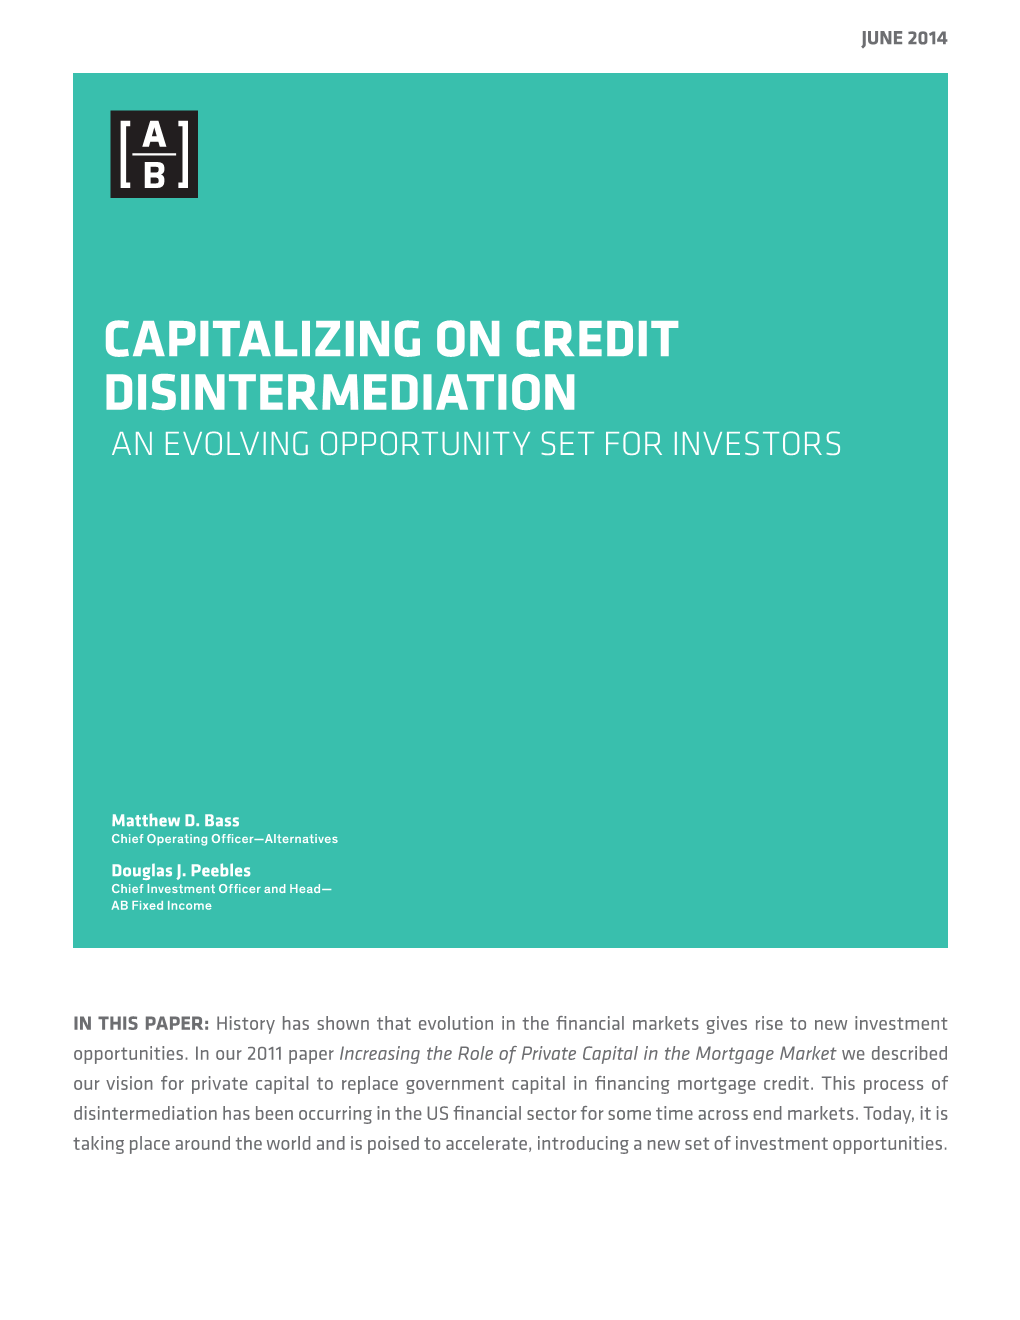 Capitalizing on Credit Disintermediation an Evolving Opportunity Set for Investors